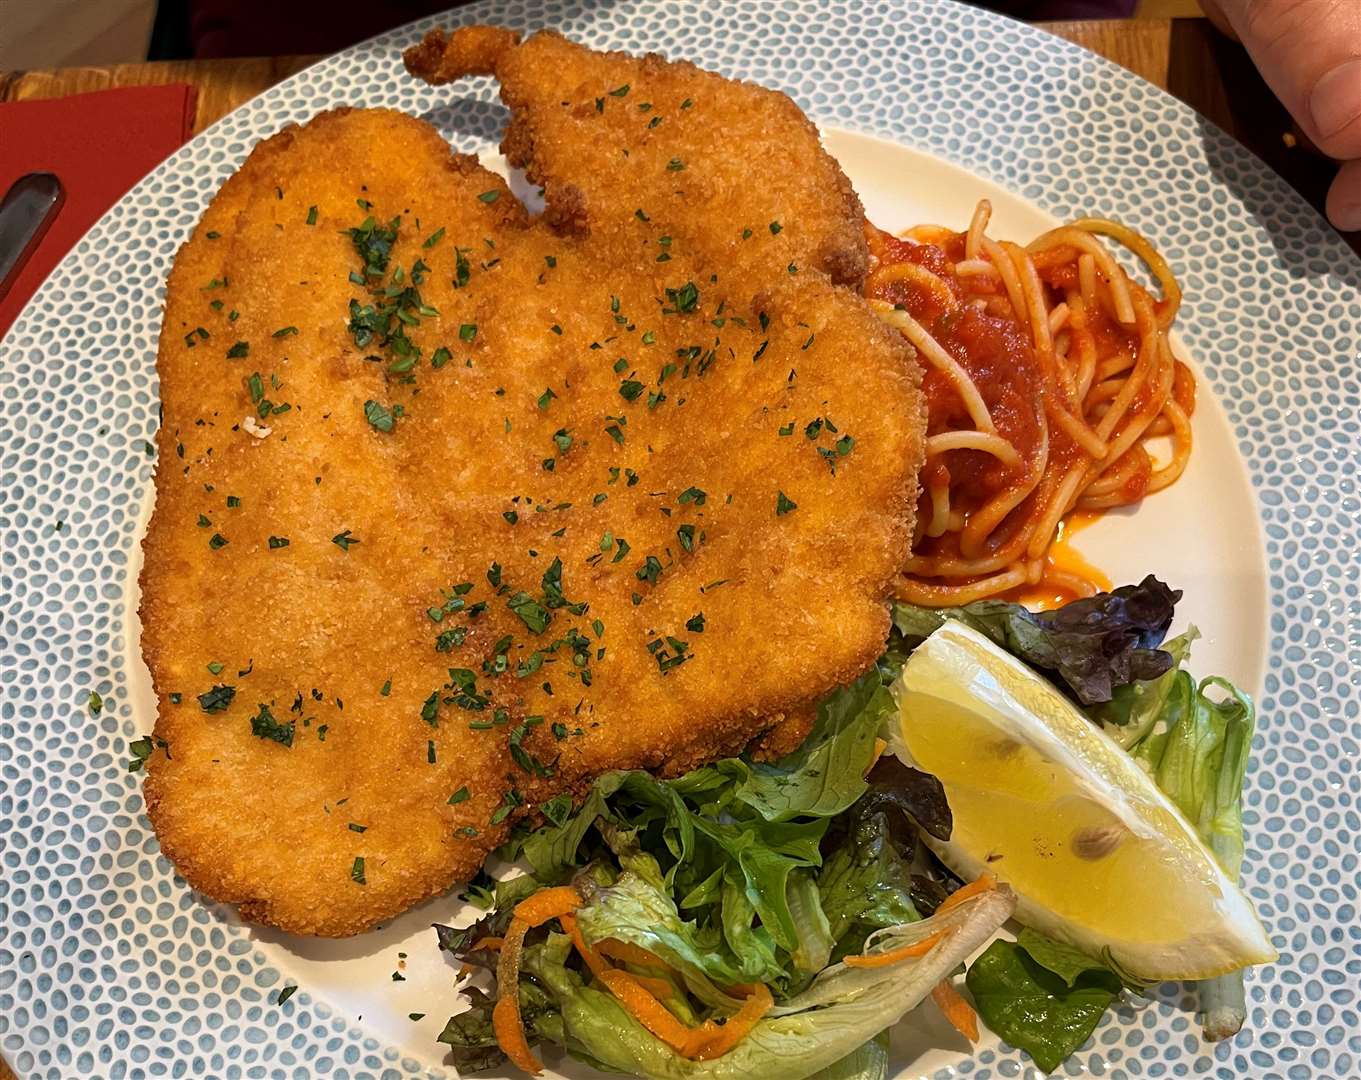 My husband ordered the Pollo Milanese